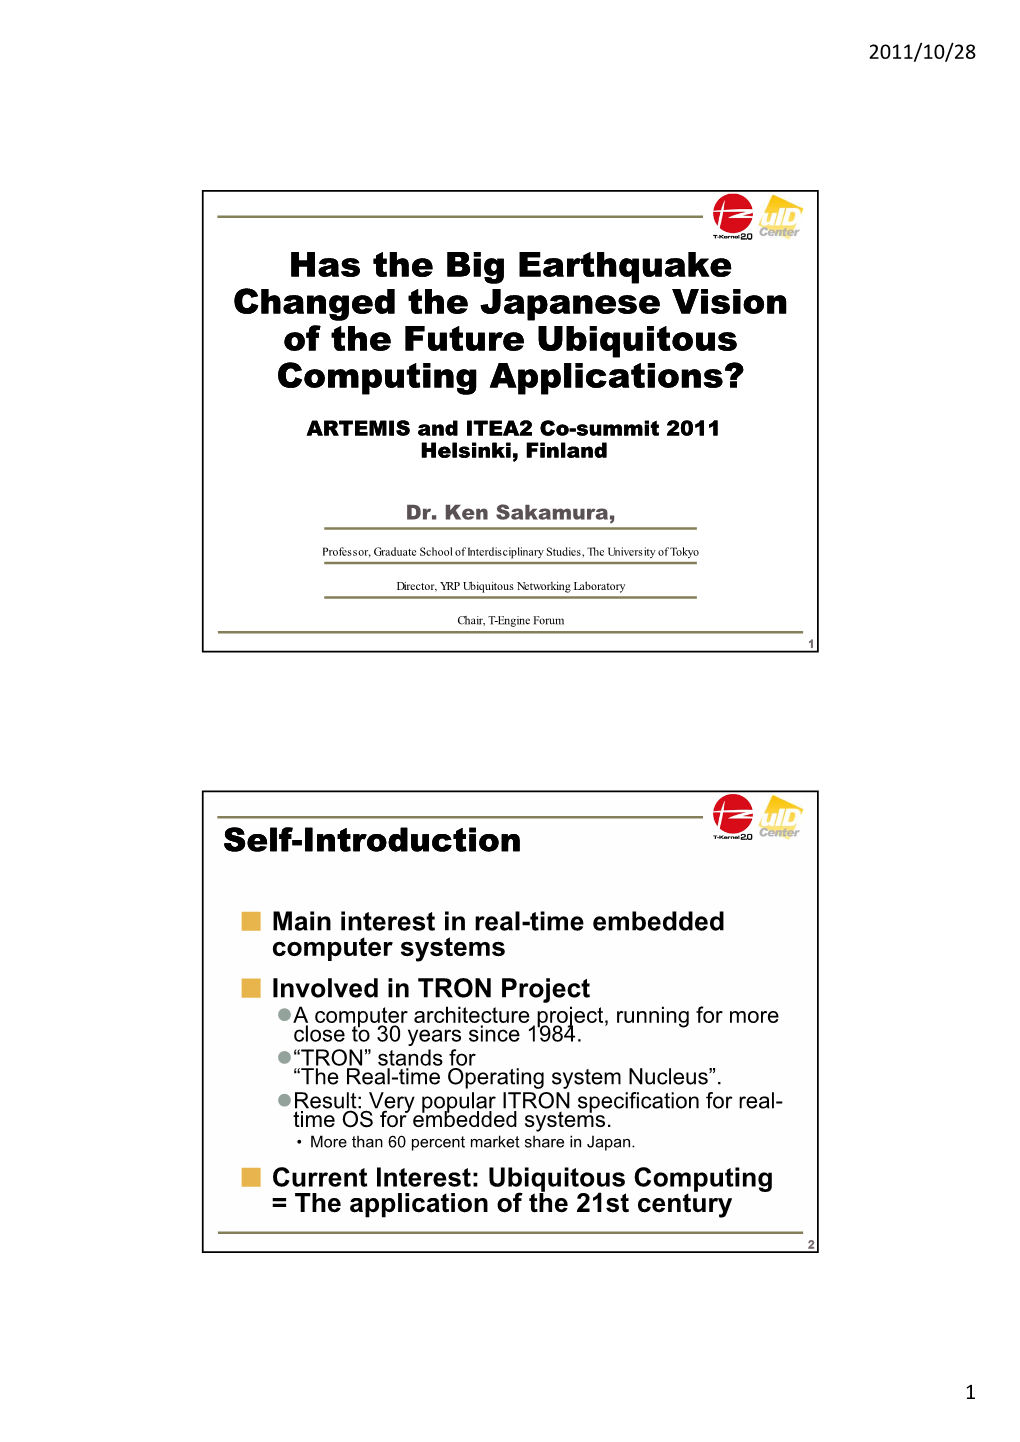 Has the Big Earthquake Changed the Japanese Vision of the Future Ubiquitous Computing Applications?